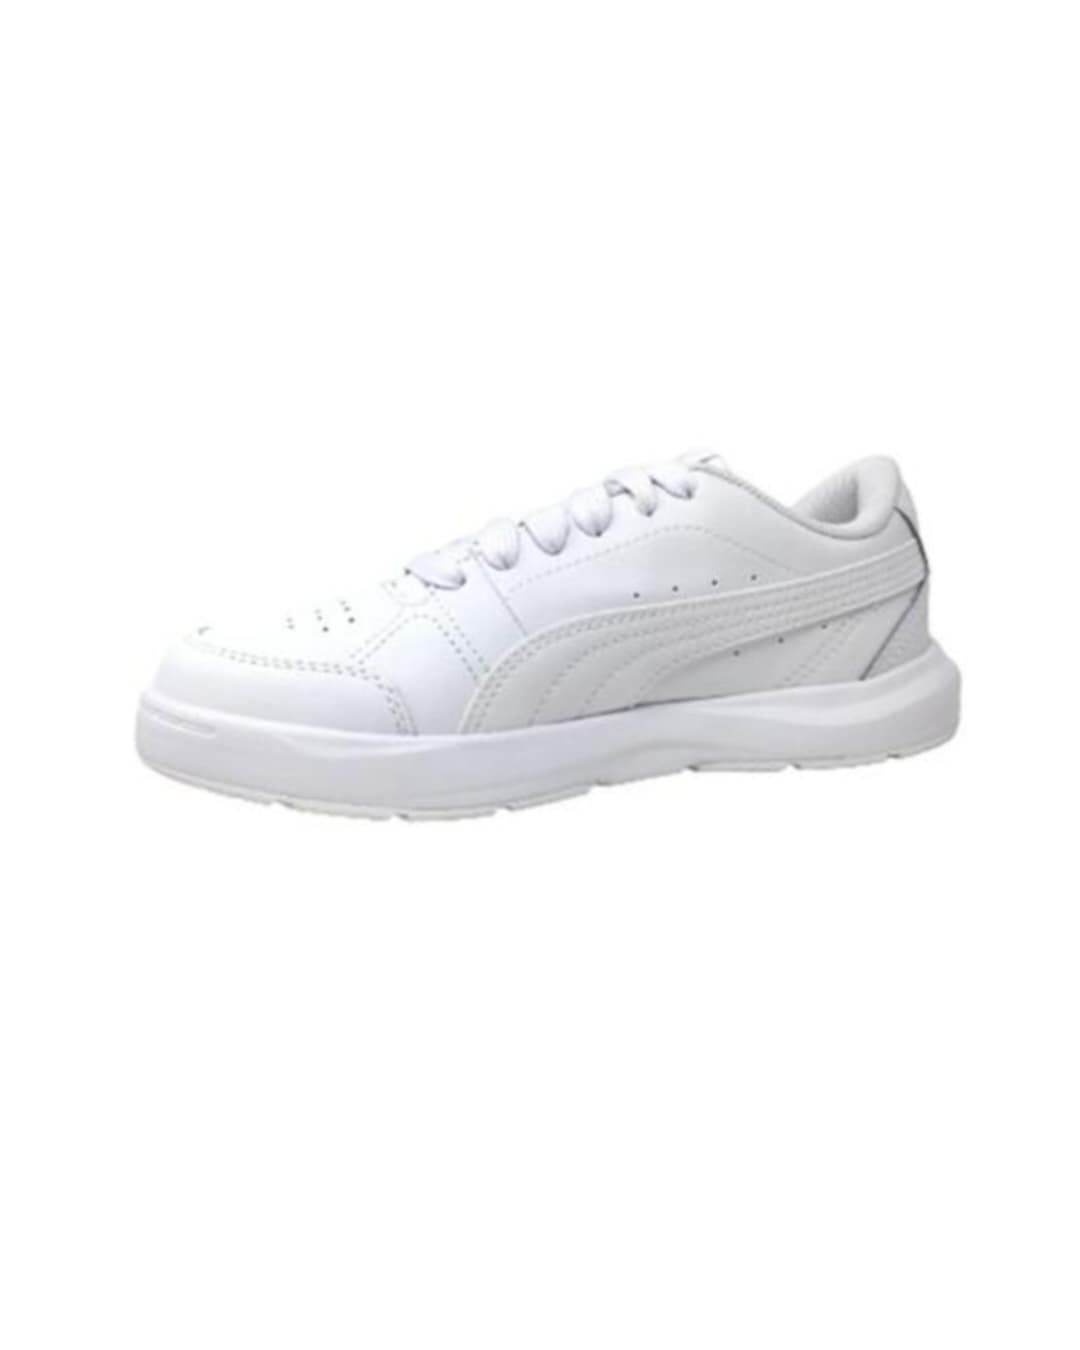 Puma Evolve Court Jr White Children's Sneakers with Lace - Image 5